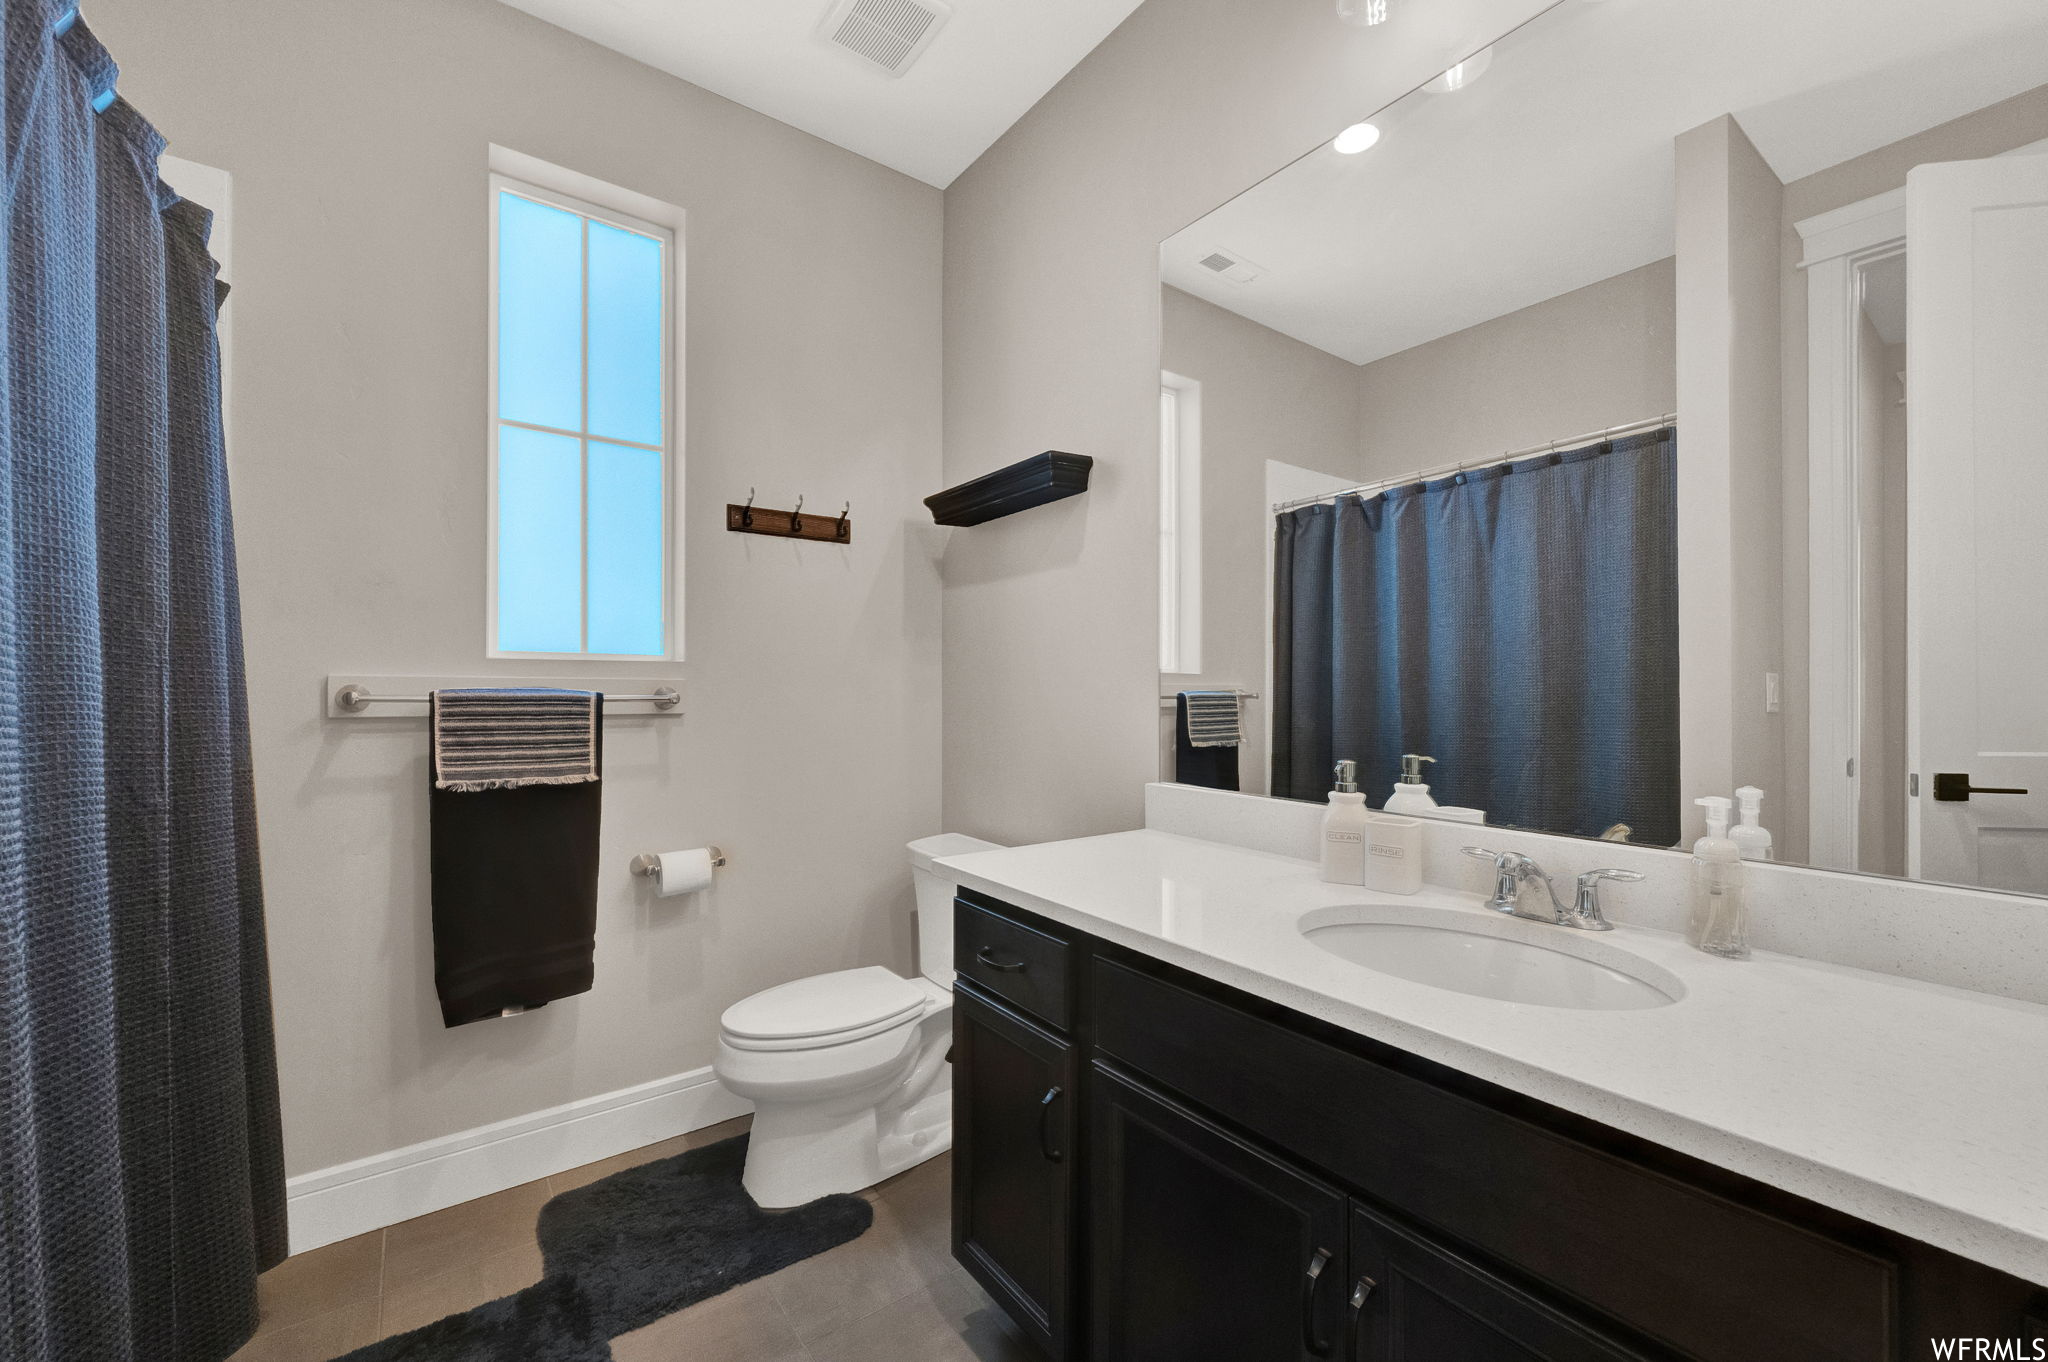 Bathroom featuring mirror, vanity with extensive cabinet space, tile floors, and a wealth of natural light